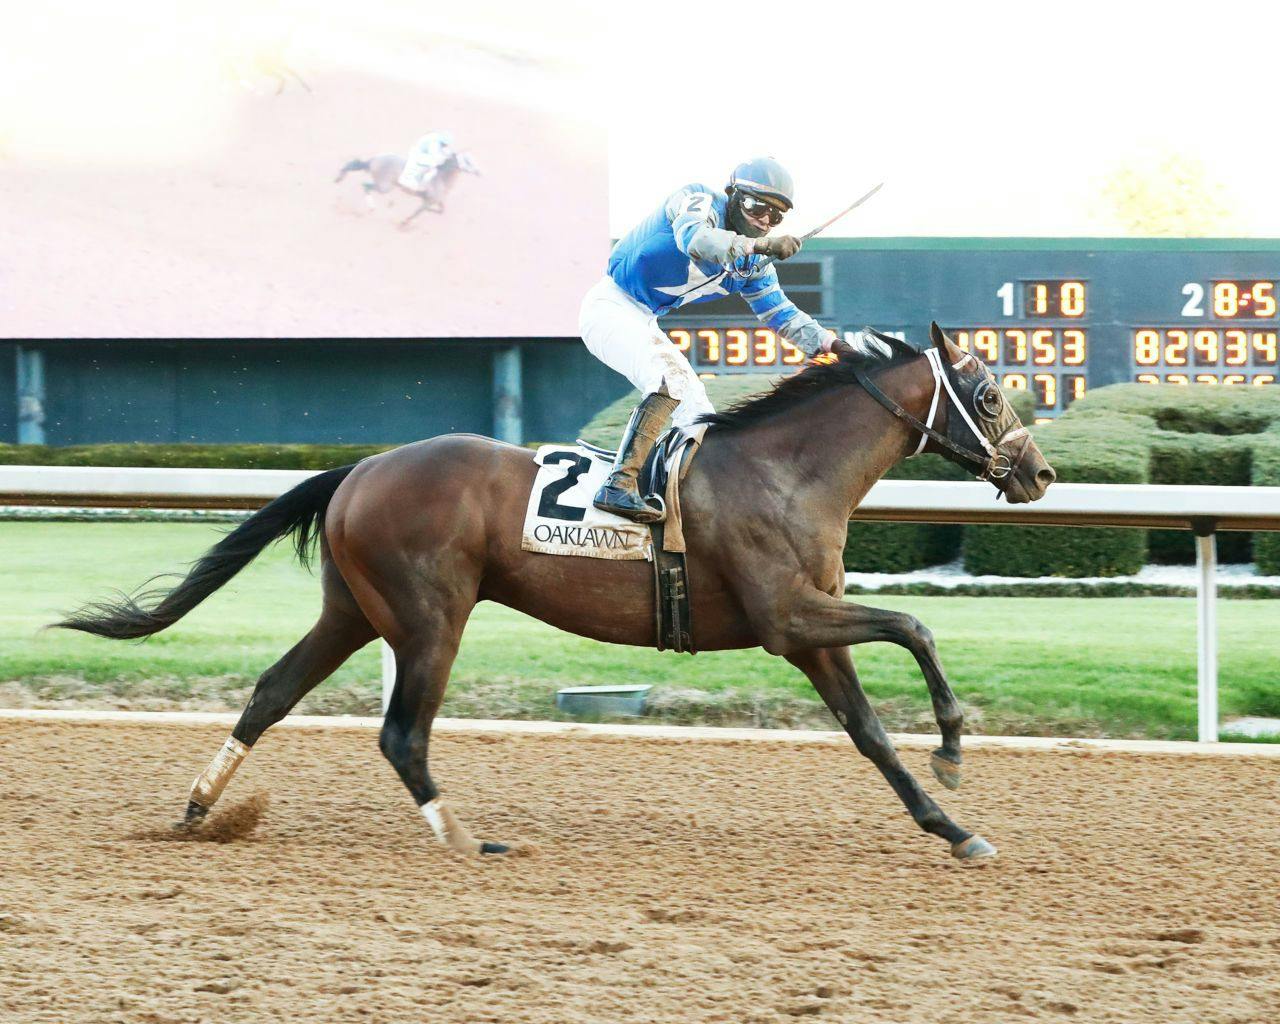 Catching Freedom winning the Smarty Jones S. at Oaklawn Park. (Photo by Coady Photography)